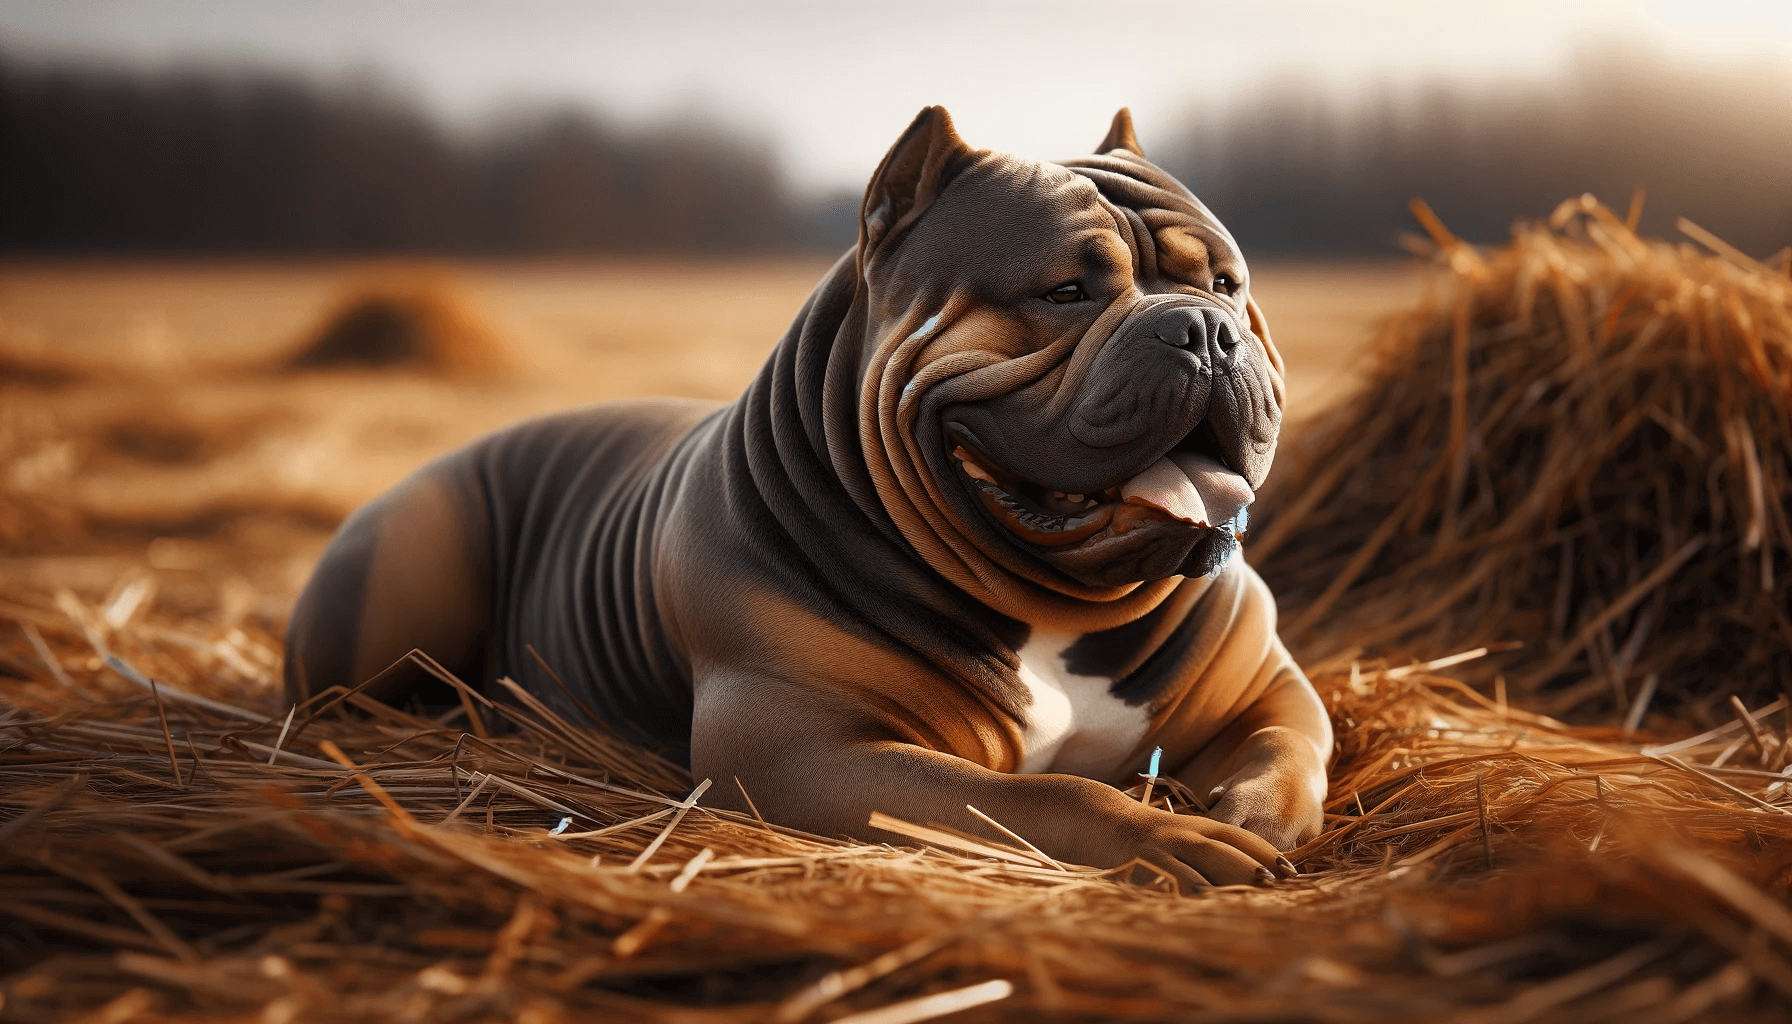 Exotic Bully lies comfortably sprawled on a patch of dry grass, looking relaxed and at ease.